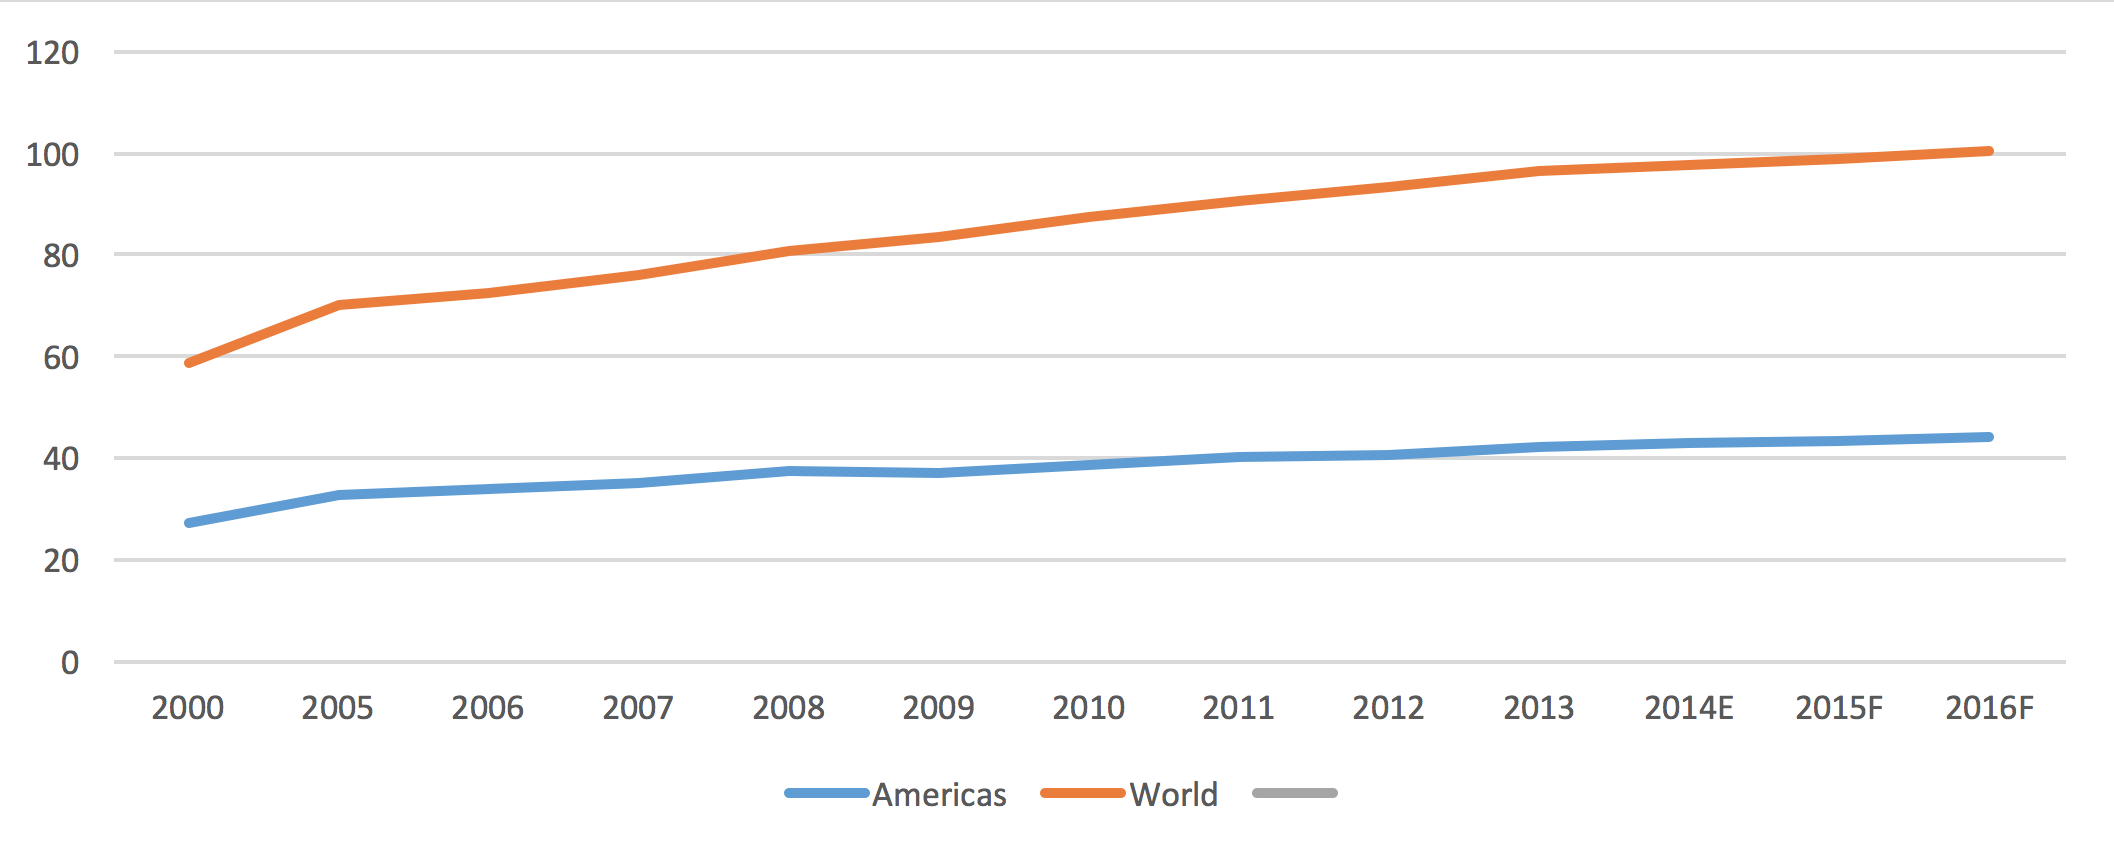 Figure 1. World chicken meat output has grown faster than in the Americas (million tonnes)